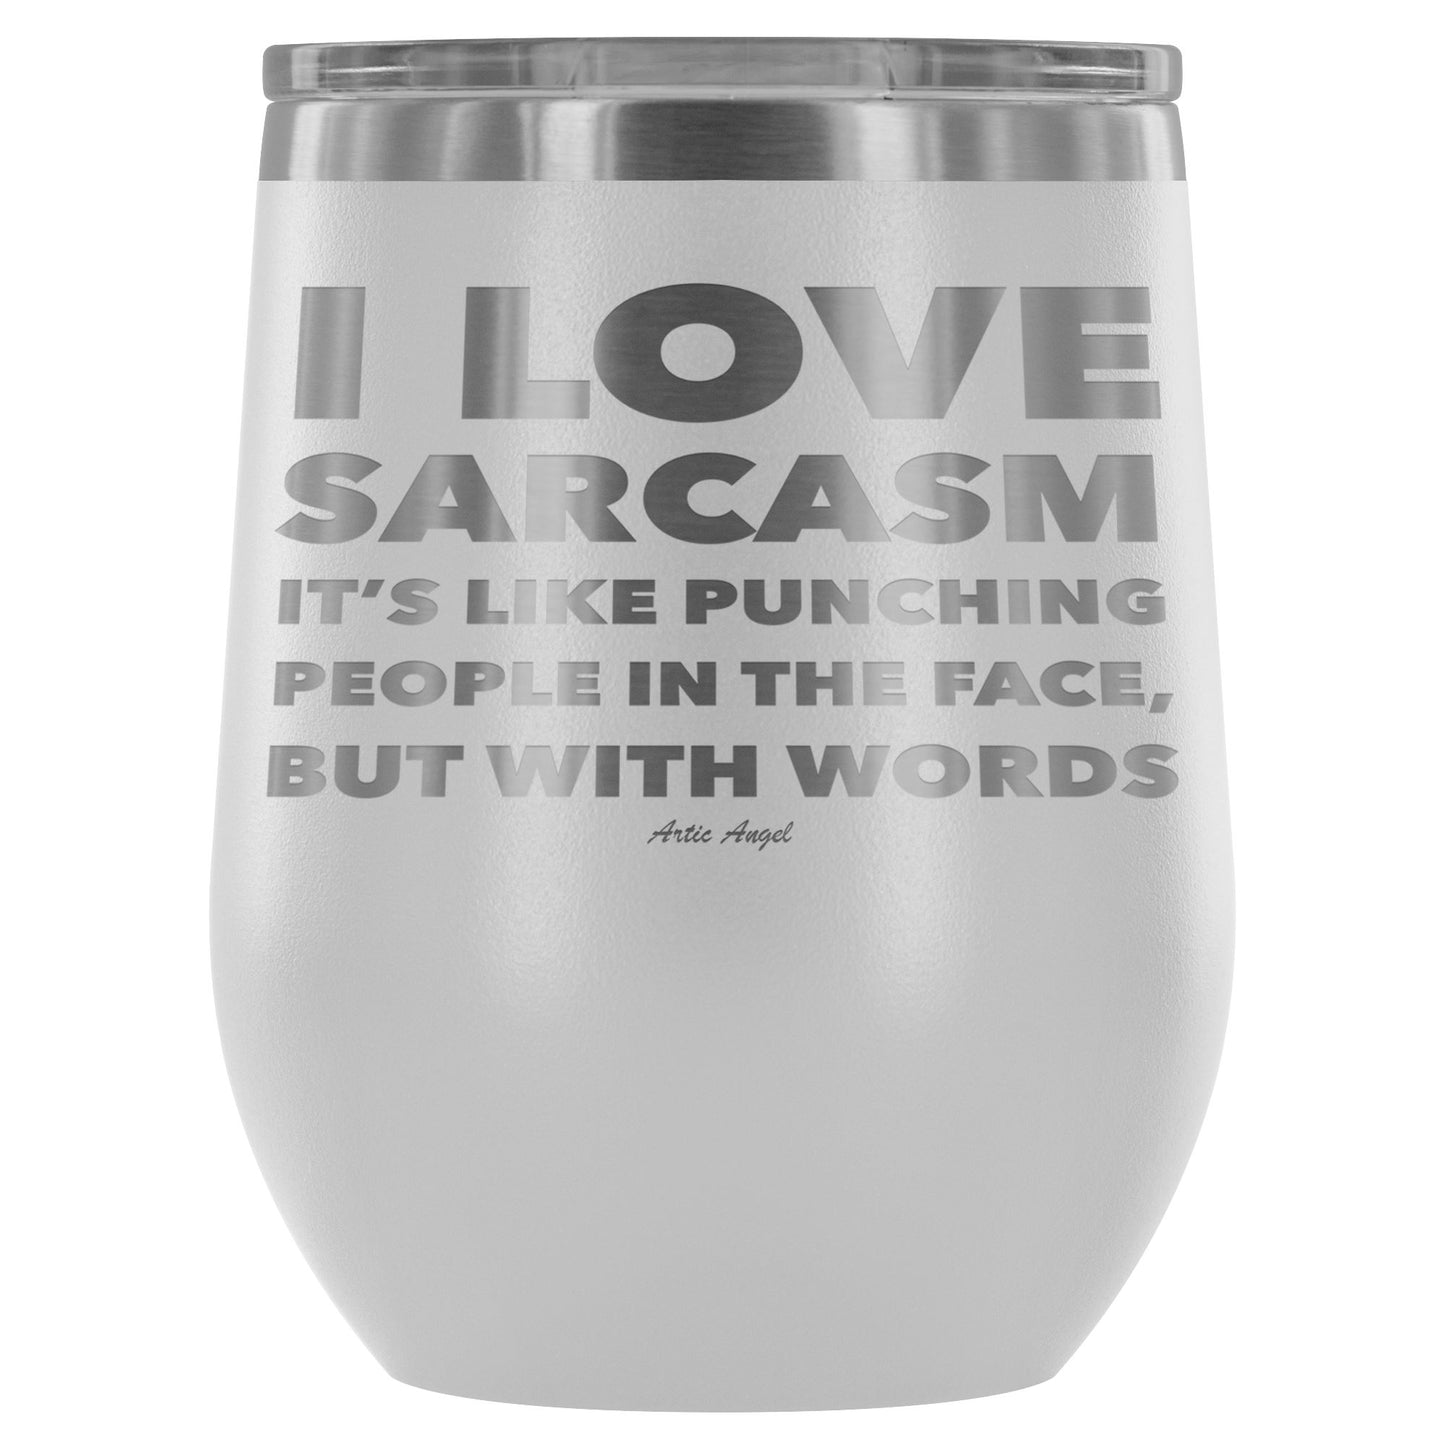 "I Love Sarcasm It's Like Punching People In The Face, But With Words" - Stemless Wine Cup Wine Tumbler White 